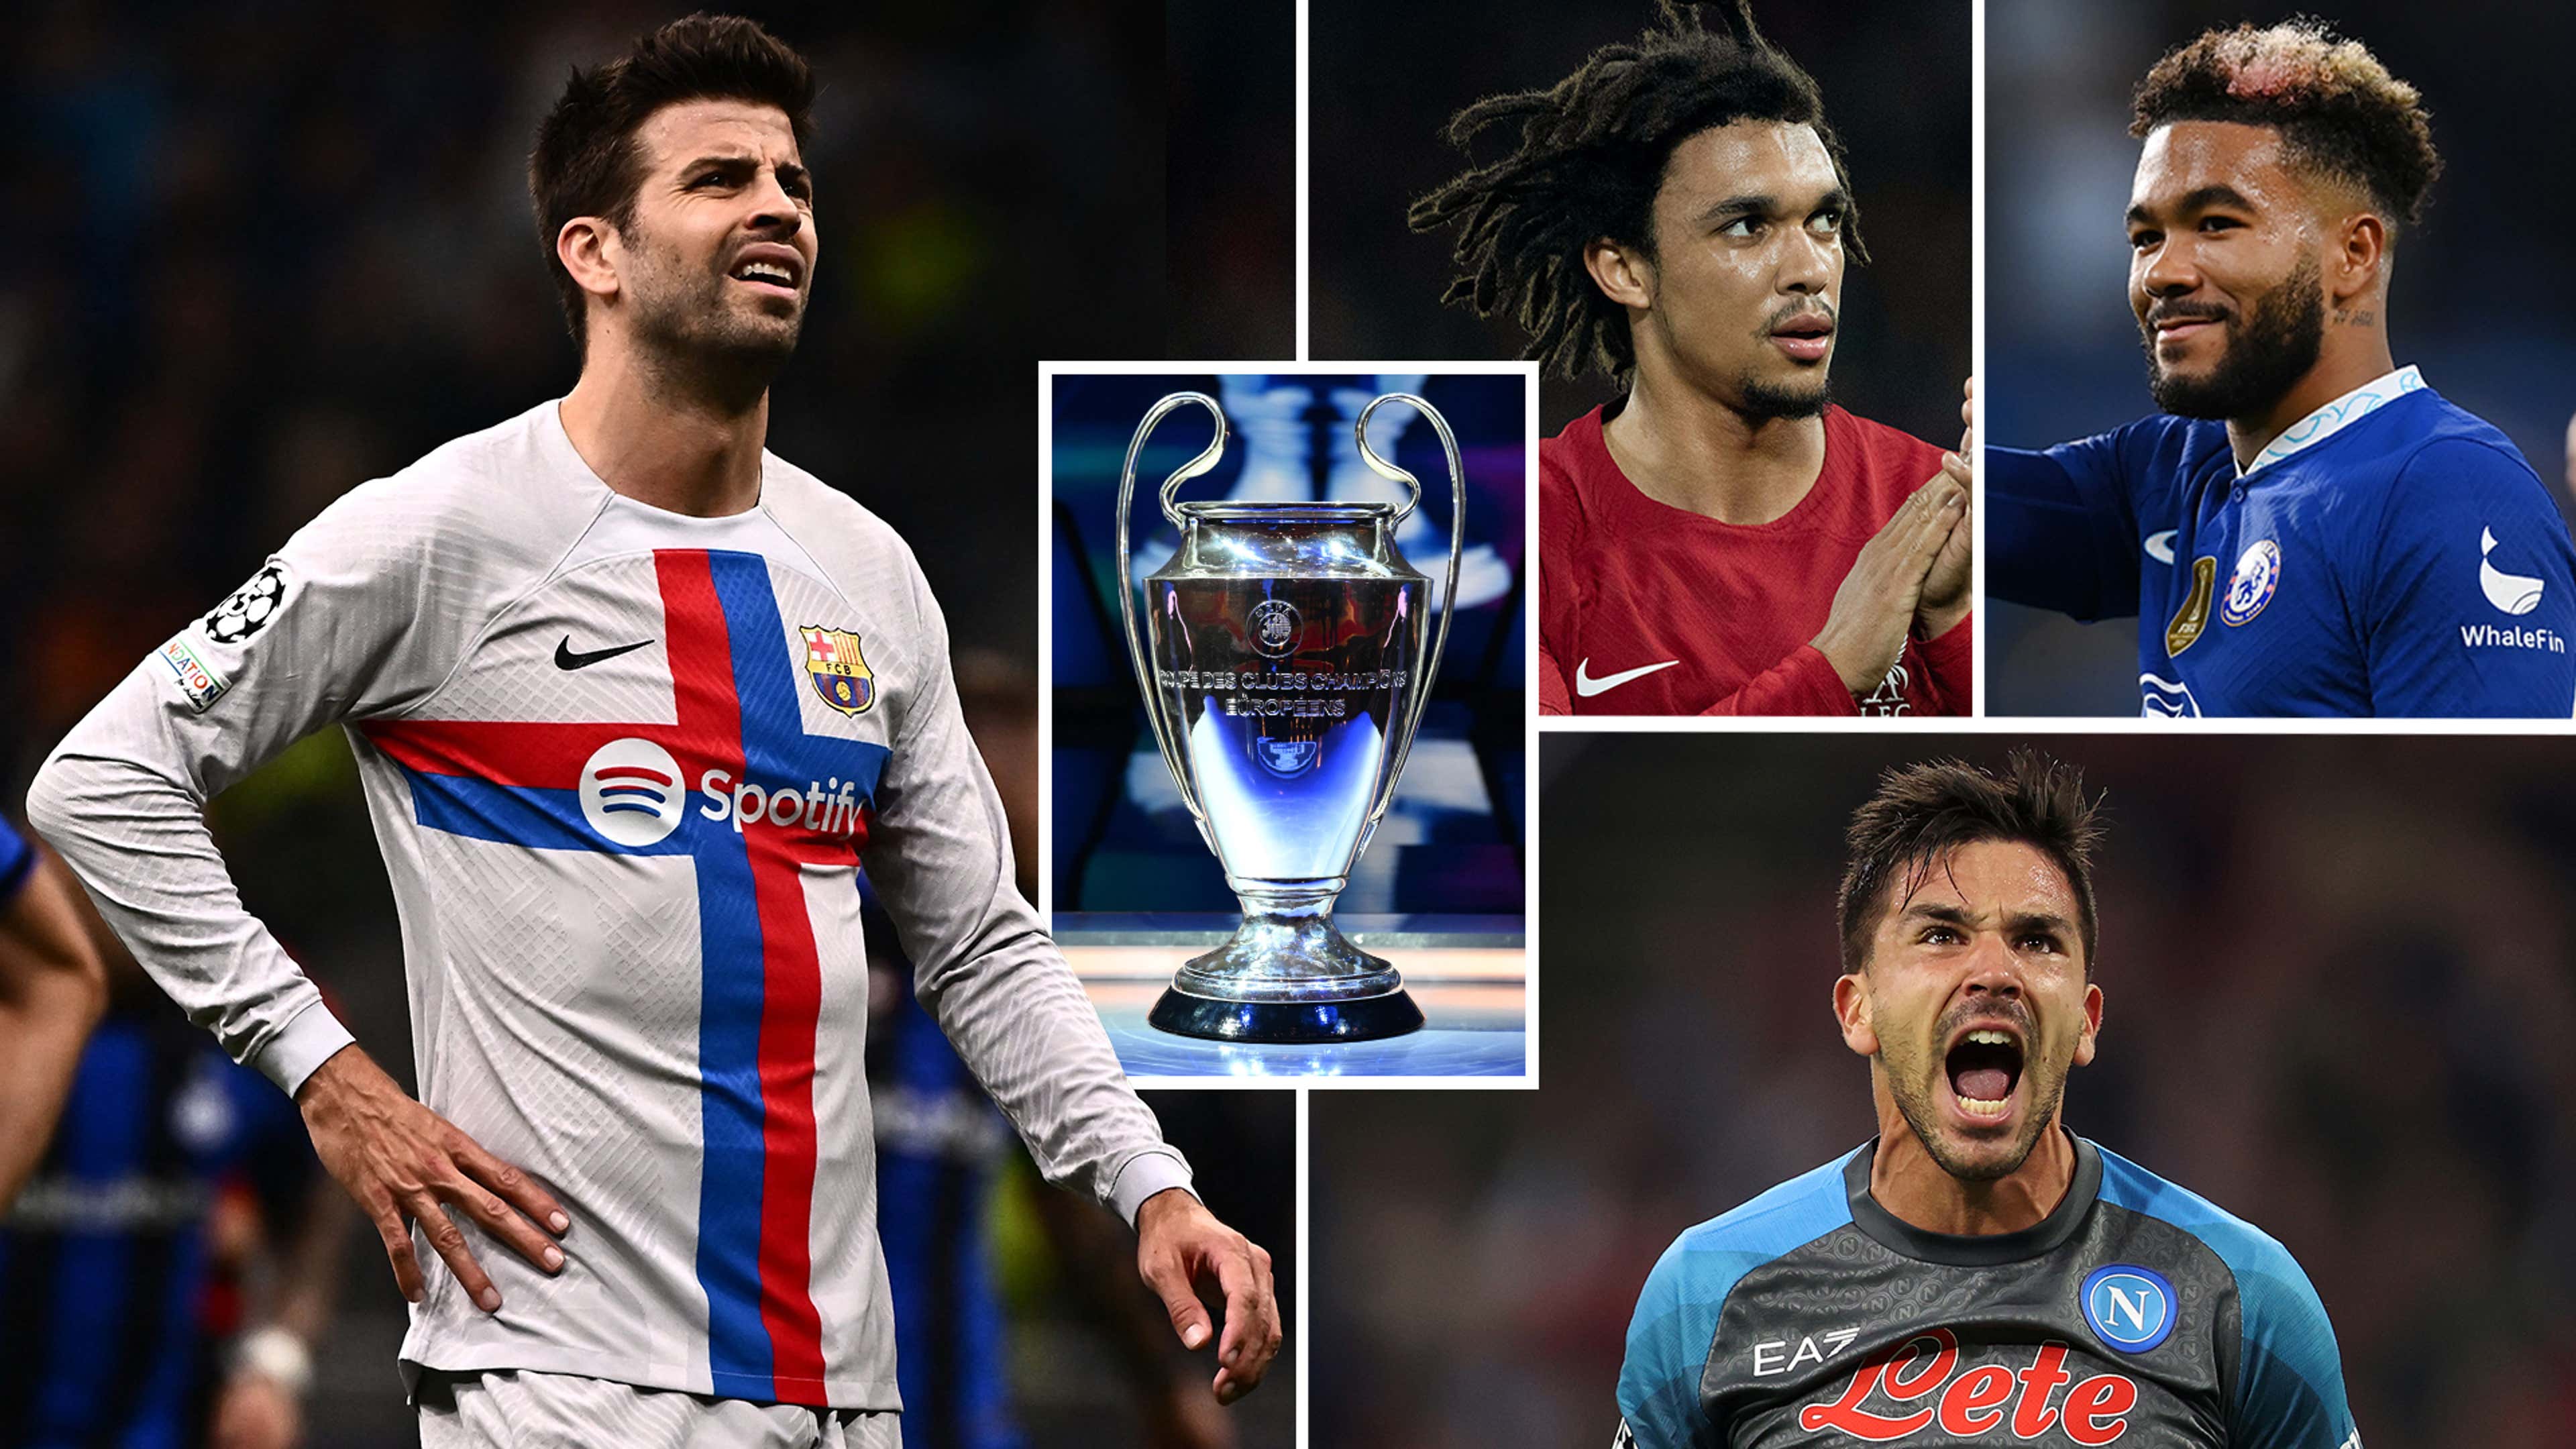 Spanish inquisitions, English duels and Hart attacks: Champions League  Winners and Losers as La Liga clubs struggle in Europe